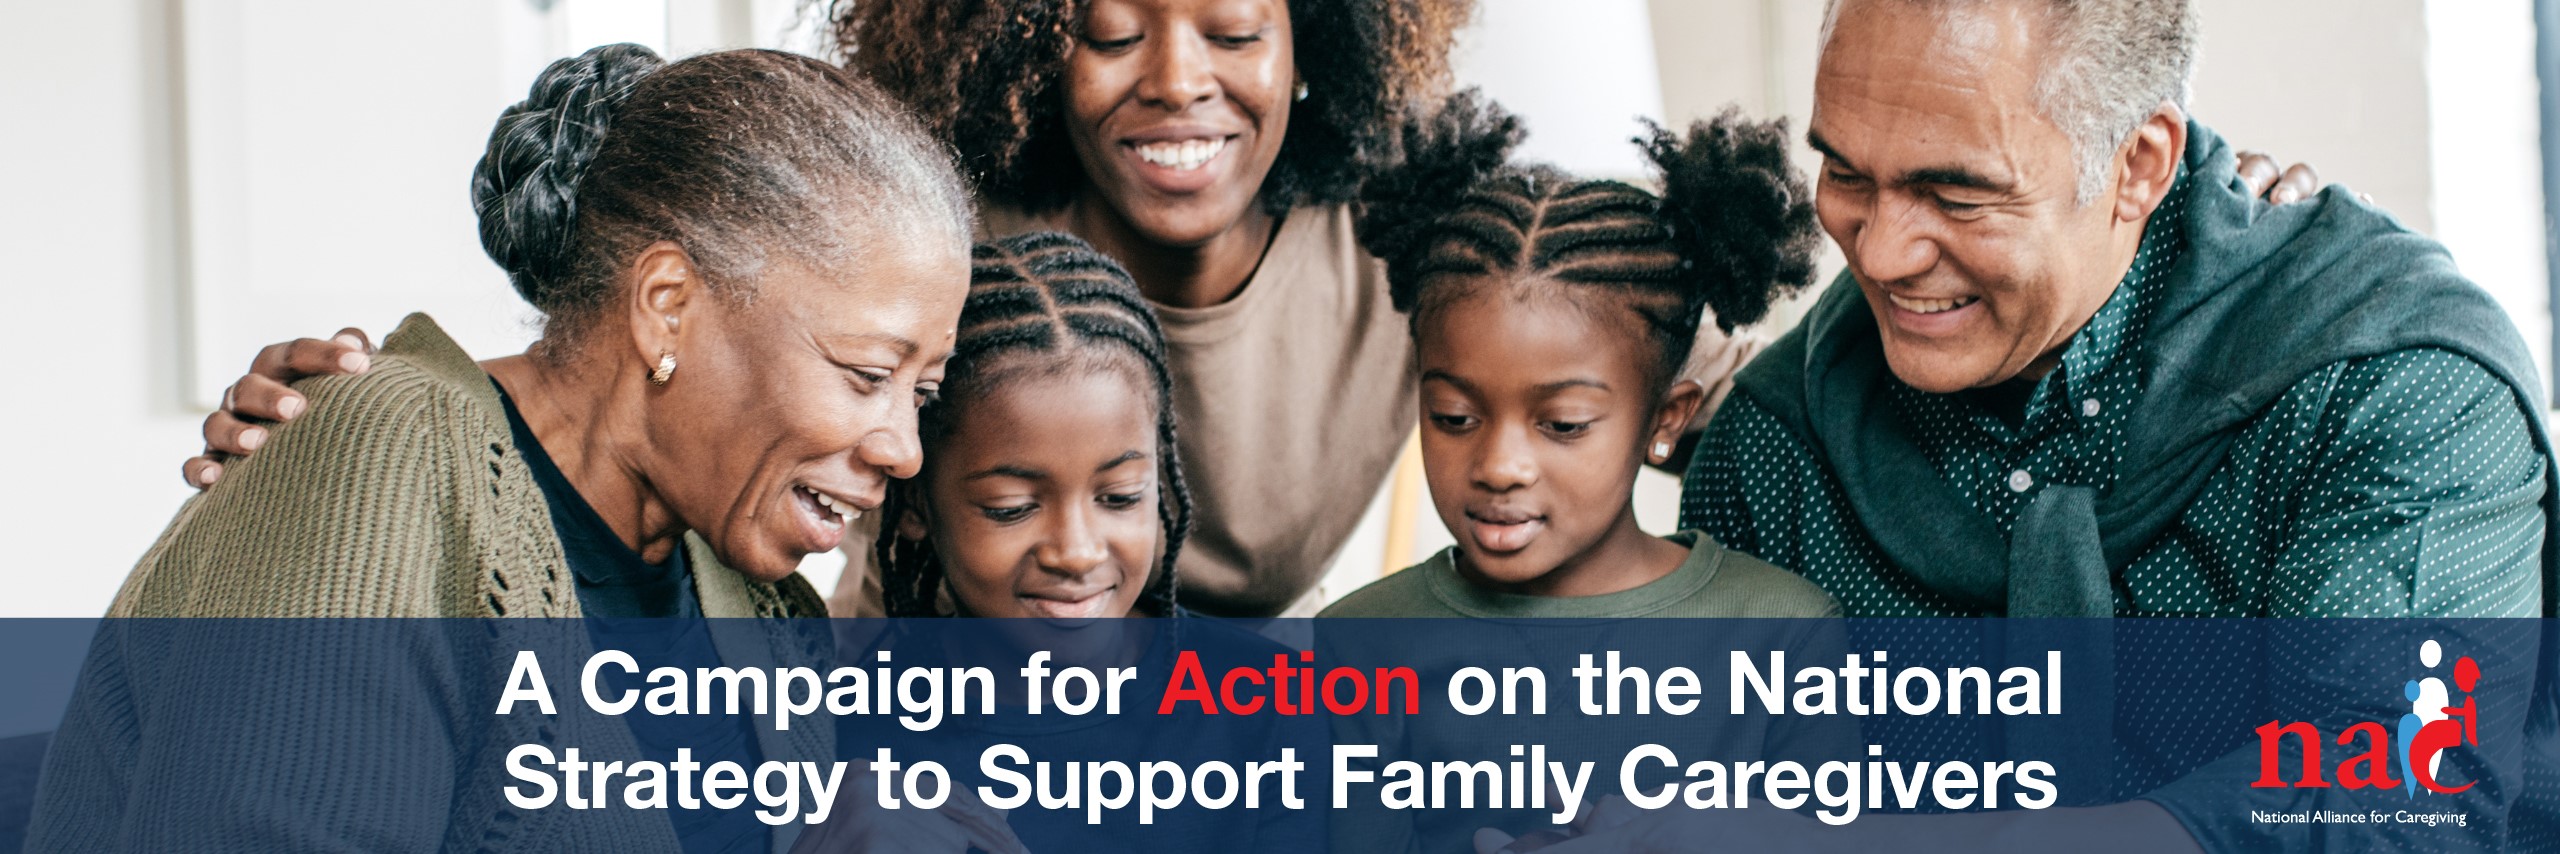 Act on RAISE Campaign Featured Site Image